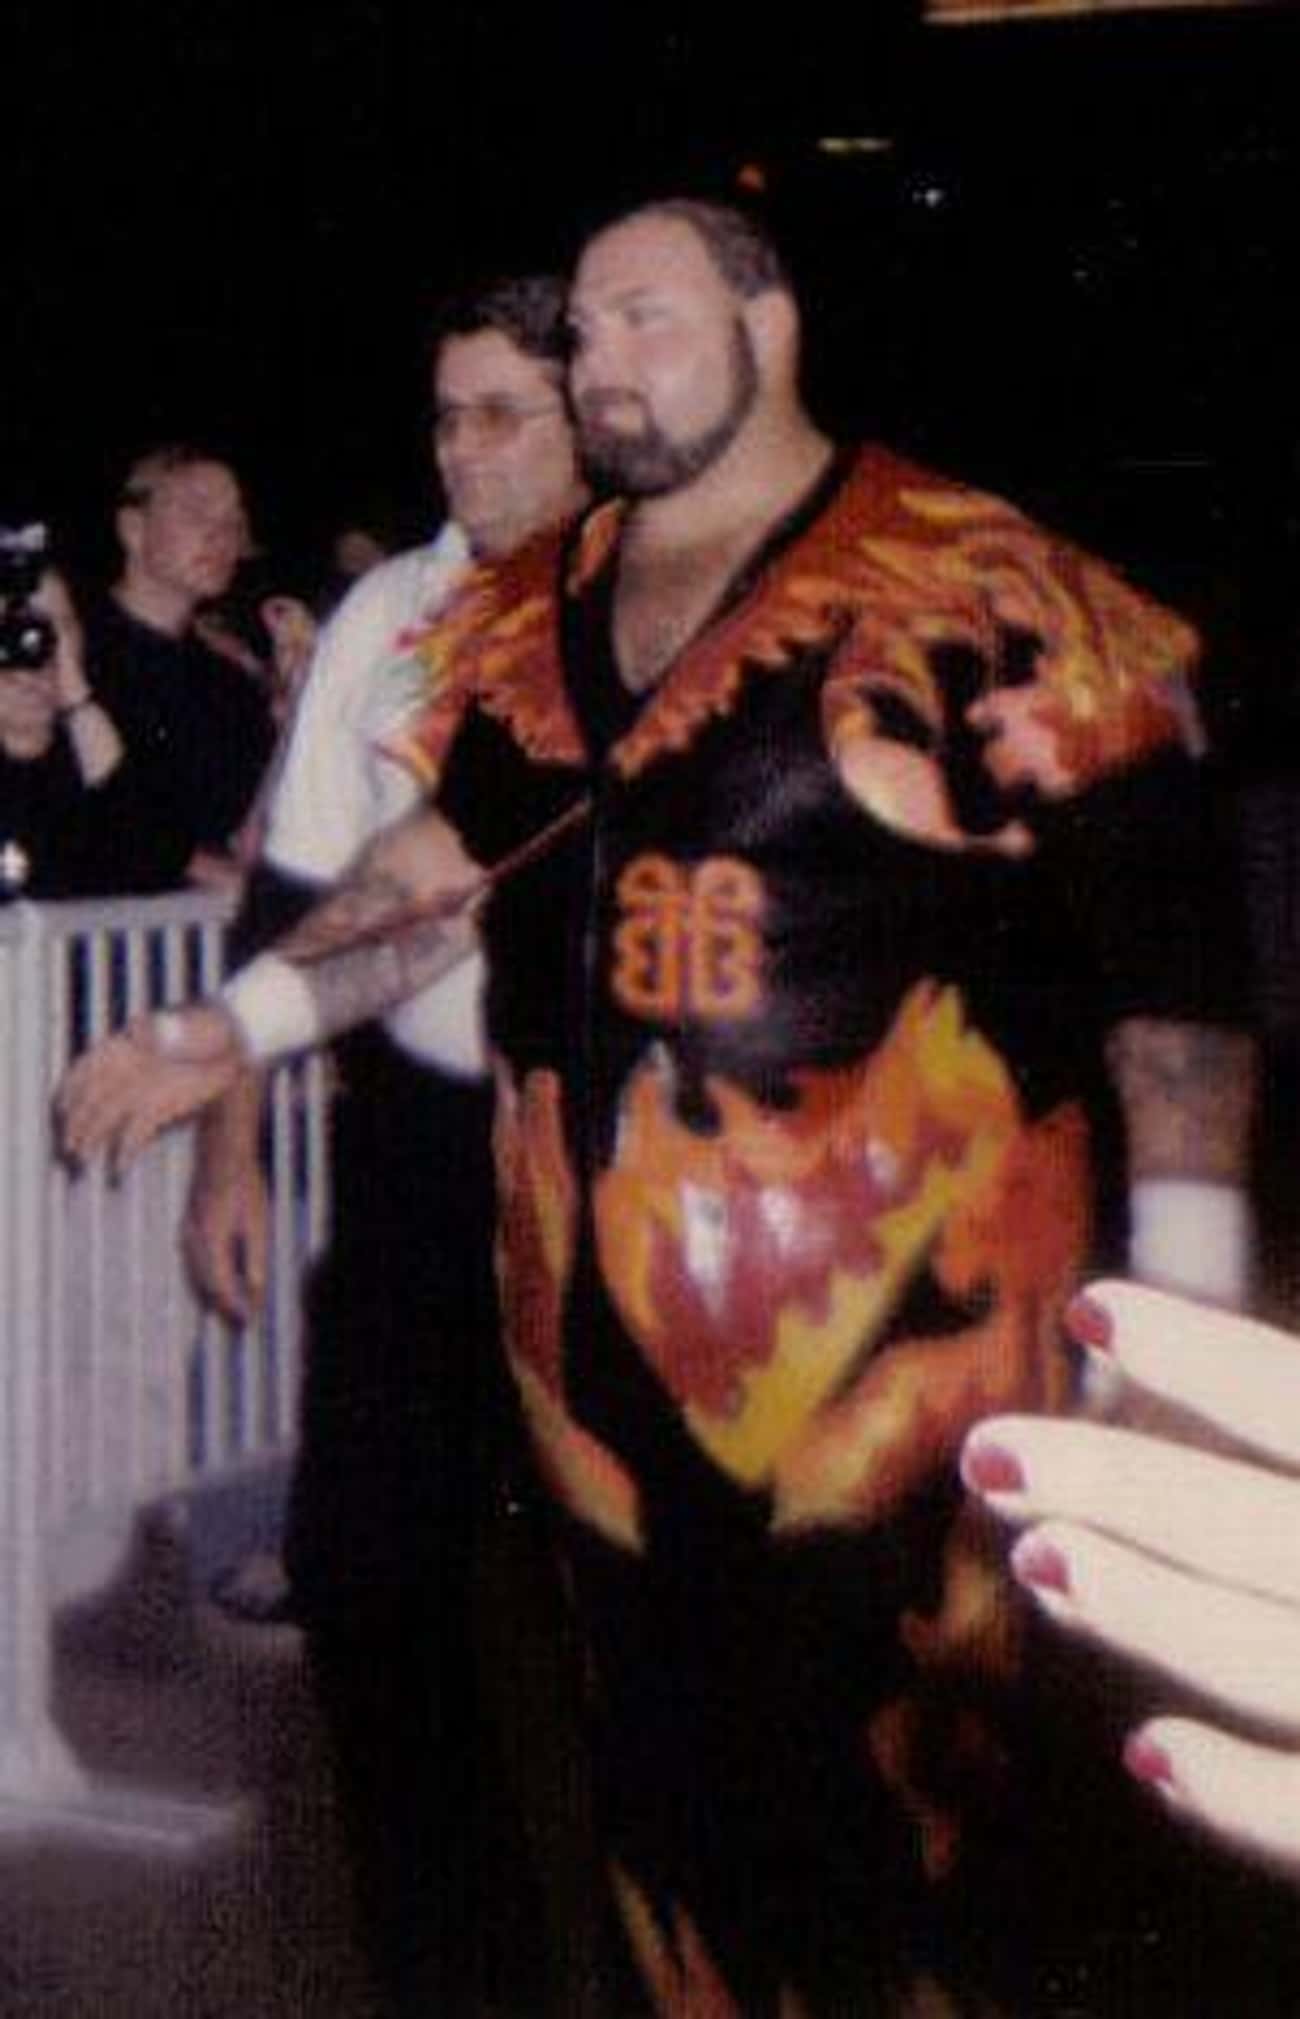 Bam Bam Bigelow Rushed Into A Fire To Save Children